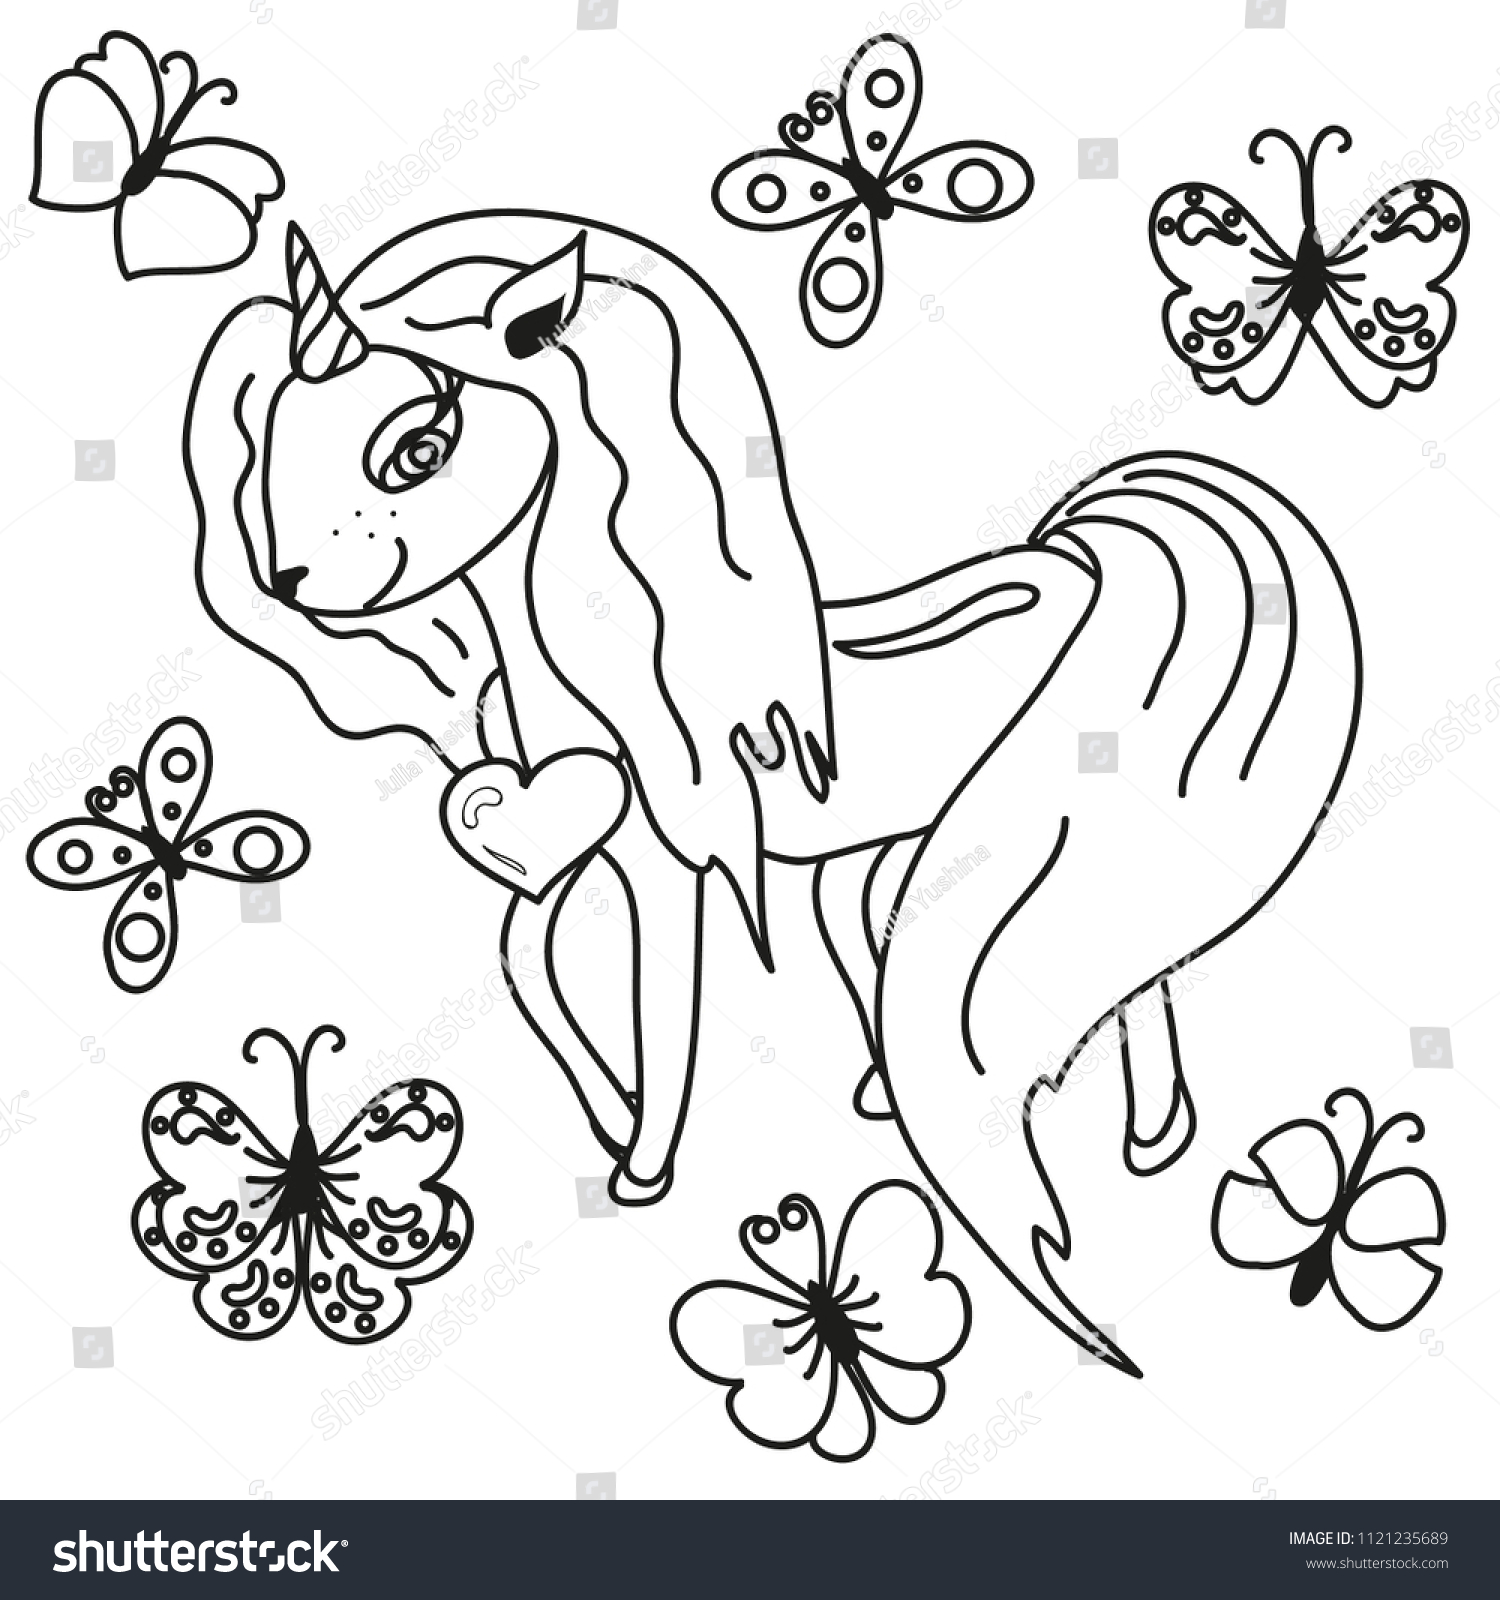 Coloring Page Kids Unicorn Butterfly On Stock Vector Royalty Free ...